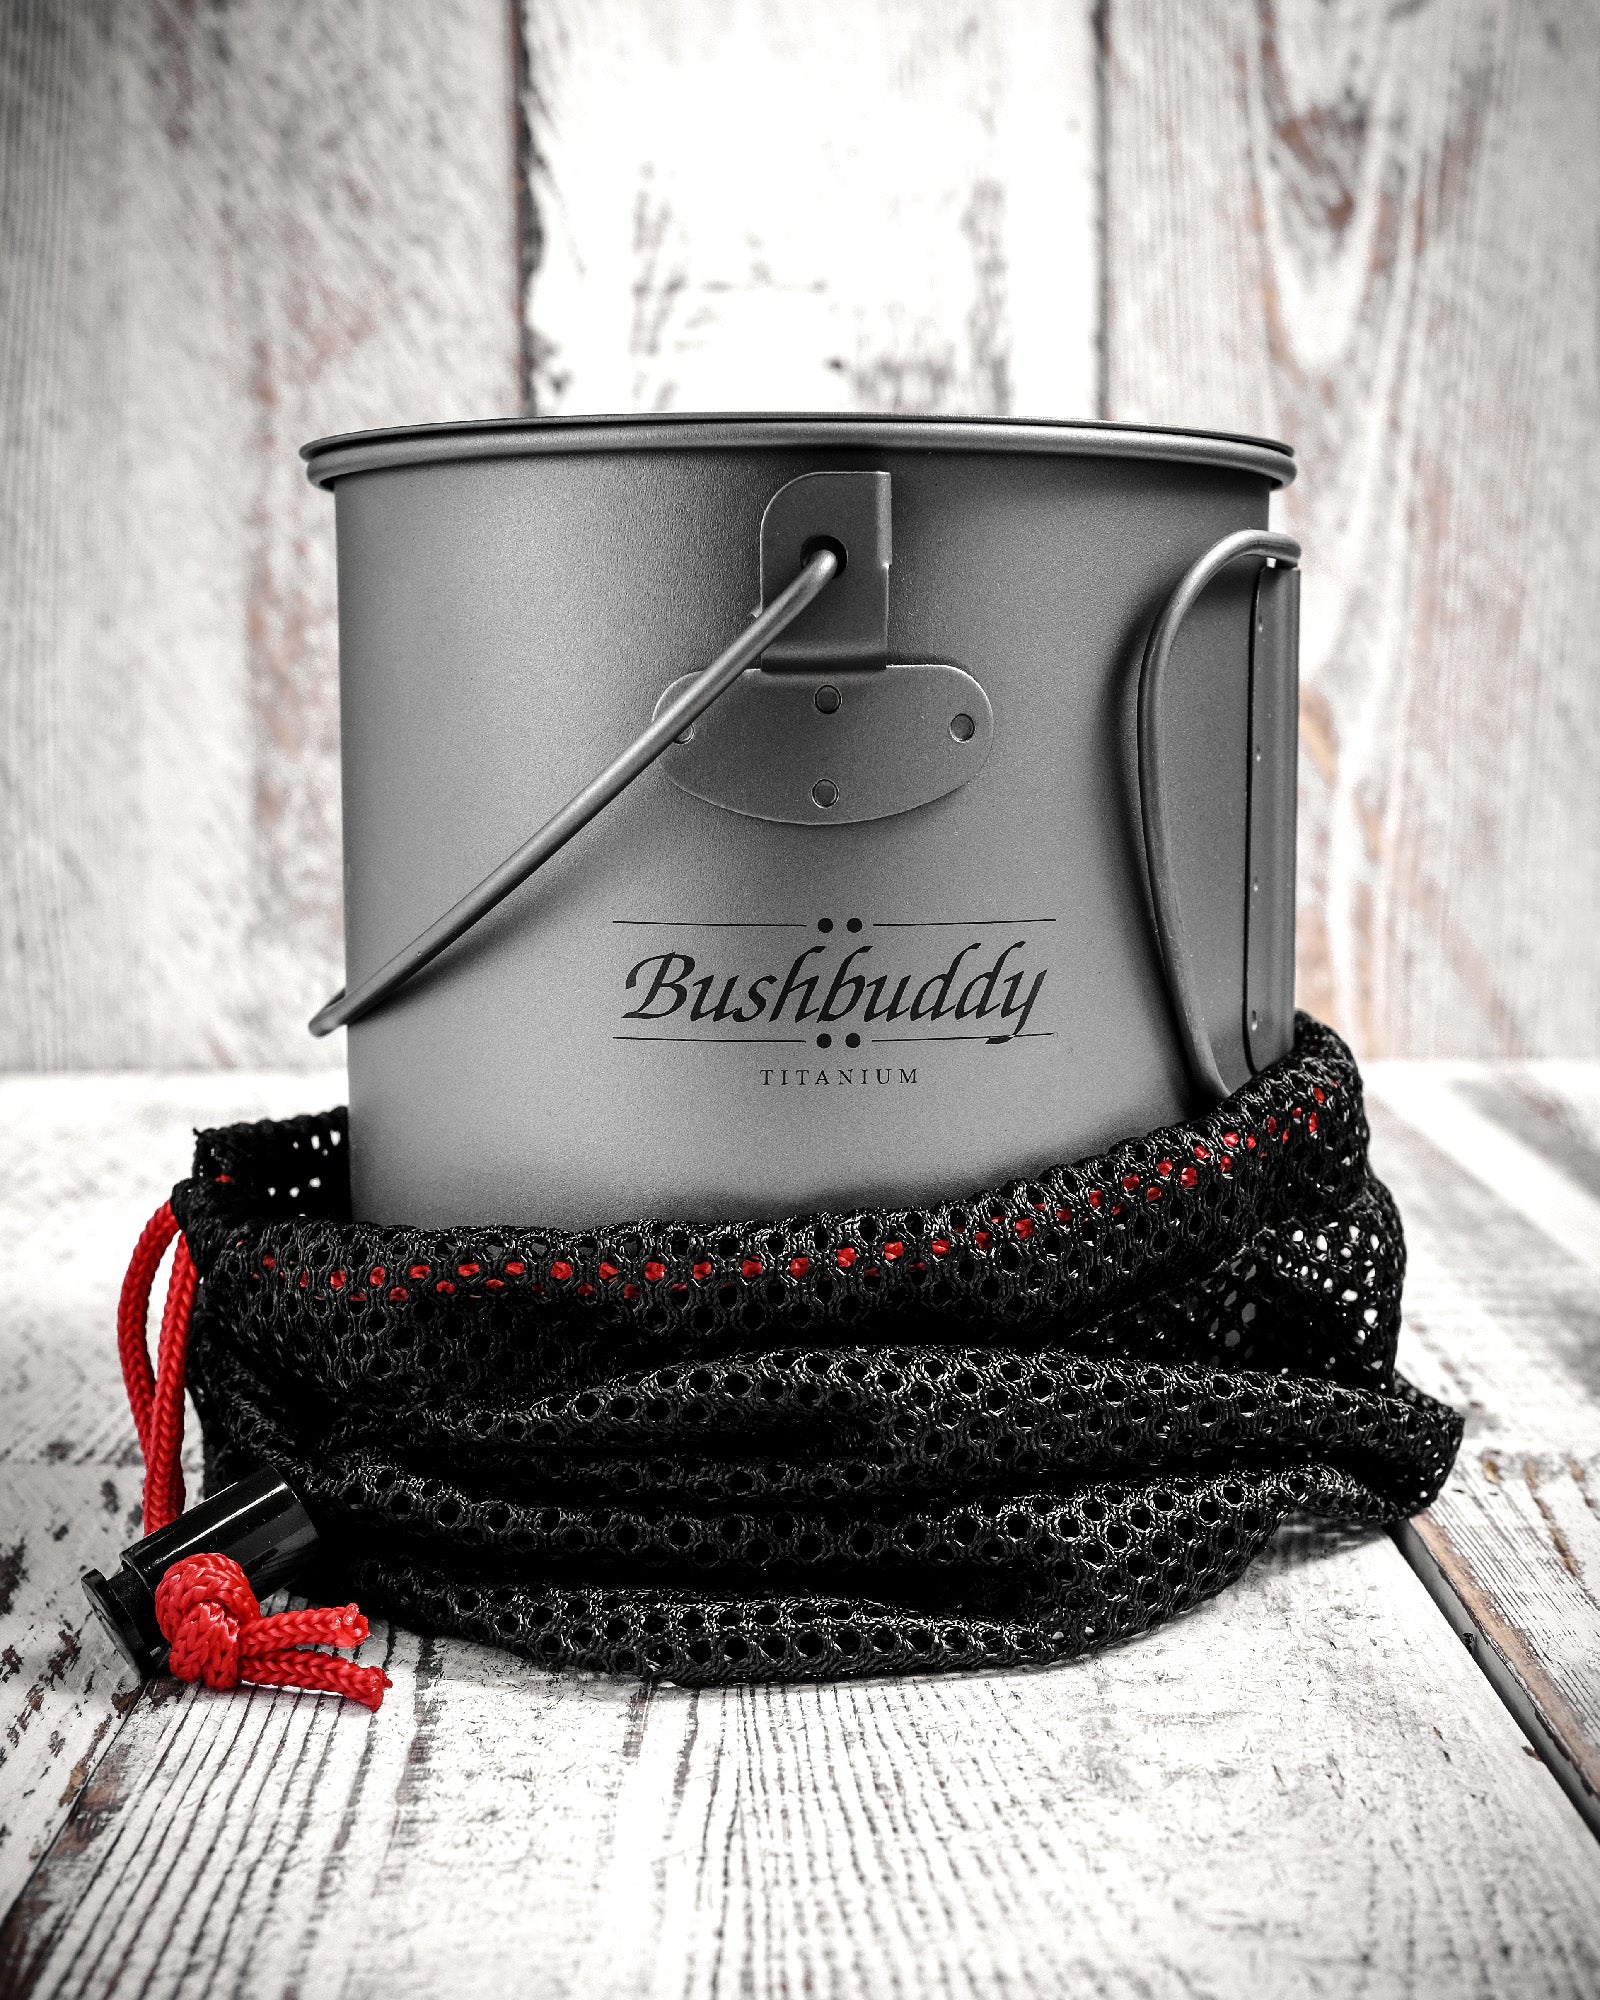 Bushbuddy Stove (Delayed Lead Times)